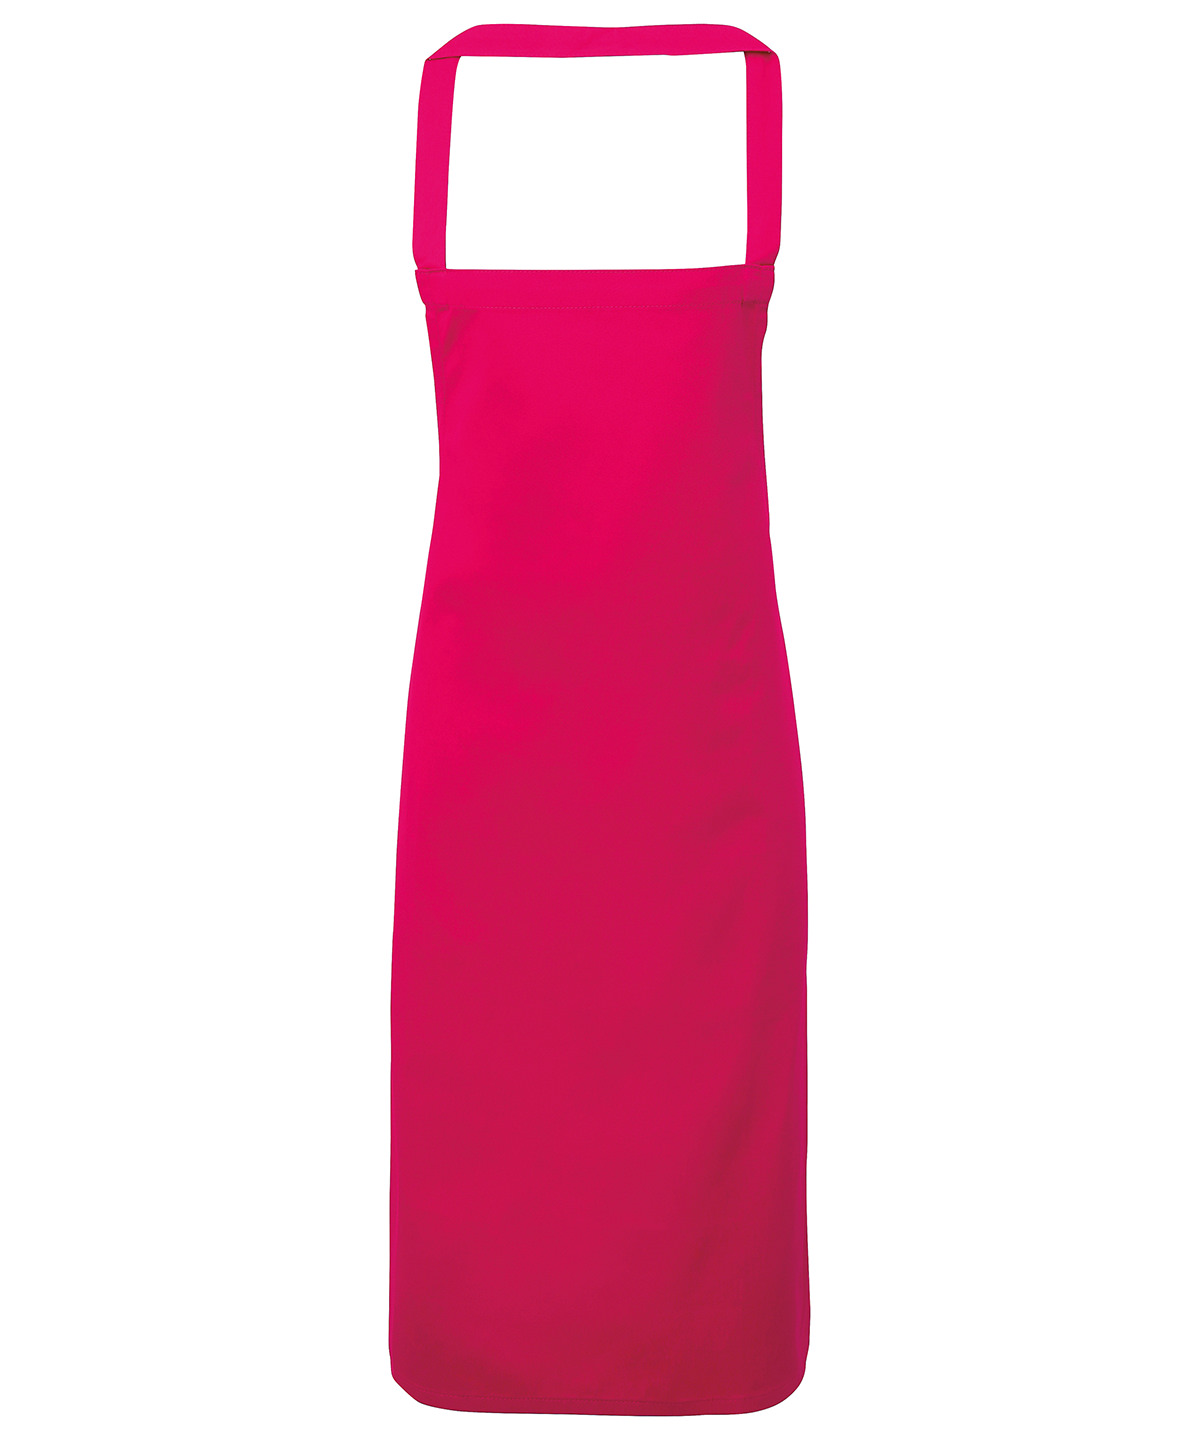 100% Cotton Apron - Organic Certified Hot Pink Size One Size